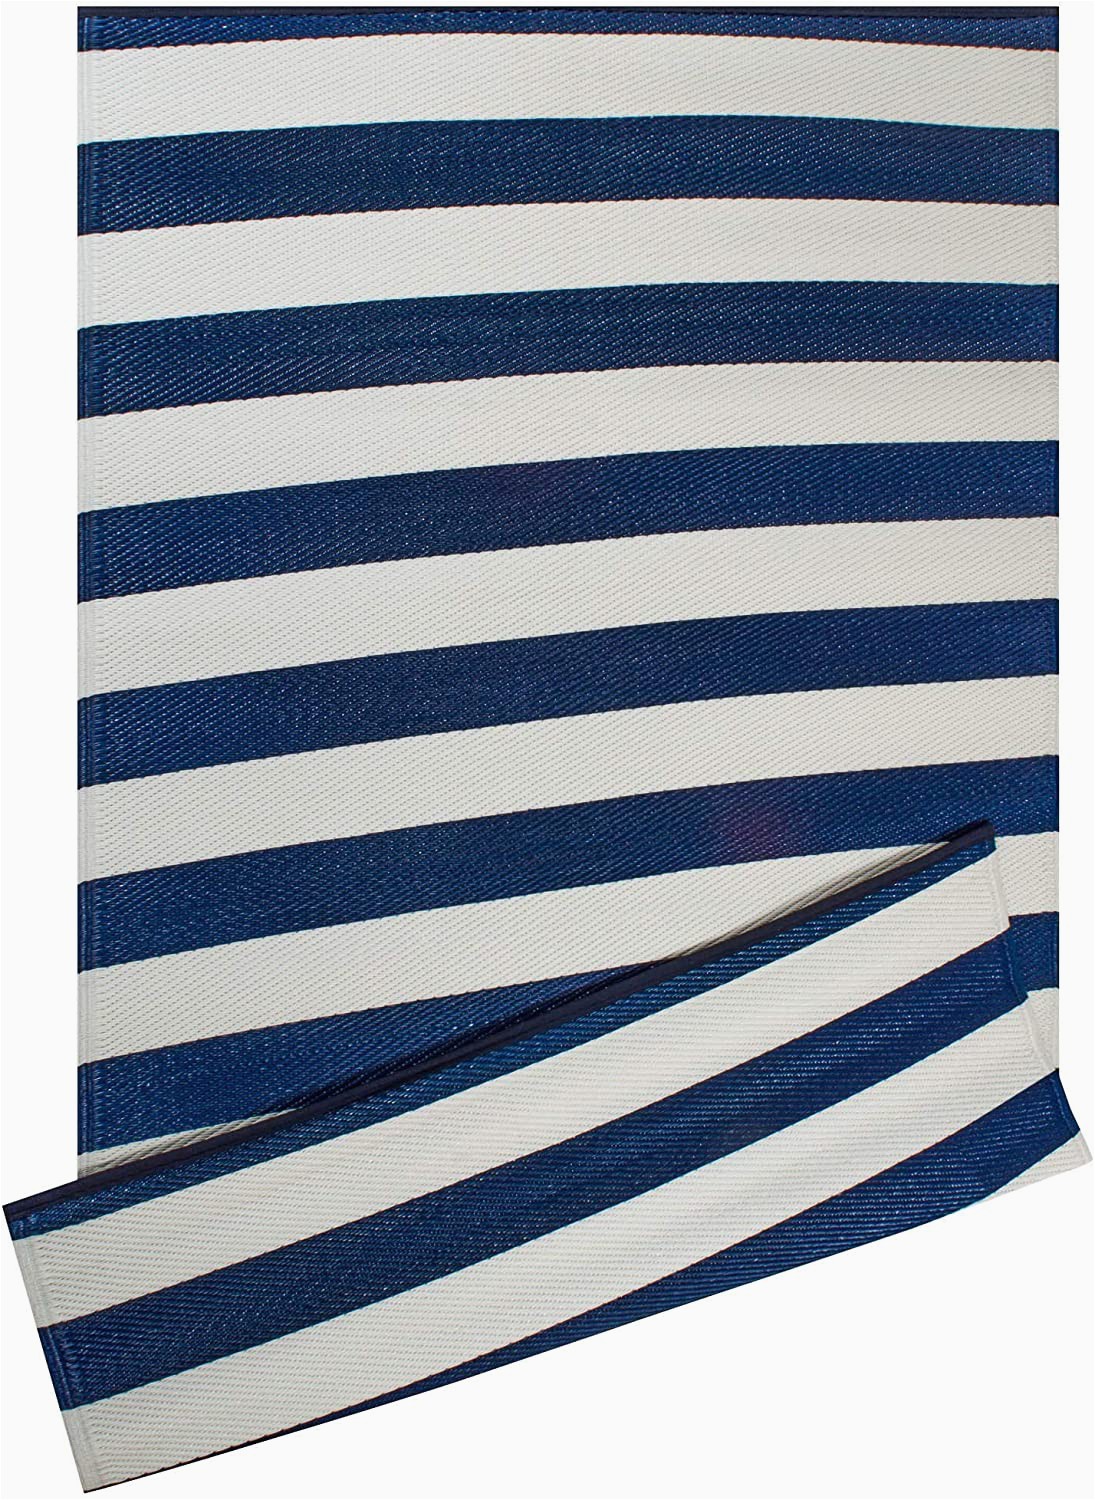 Navy Blue Woven Rug Dii Reversible Indoor Woven Striped Outdoor Rug 4×6 White & Navy